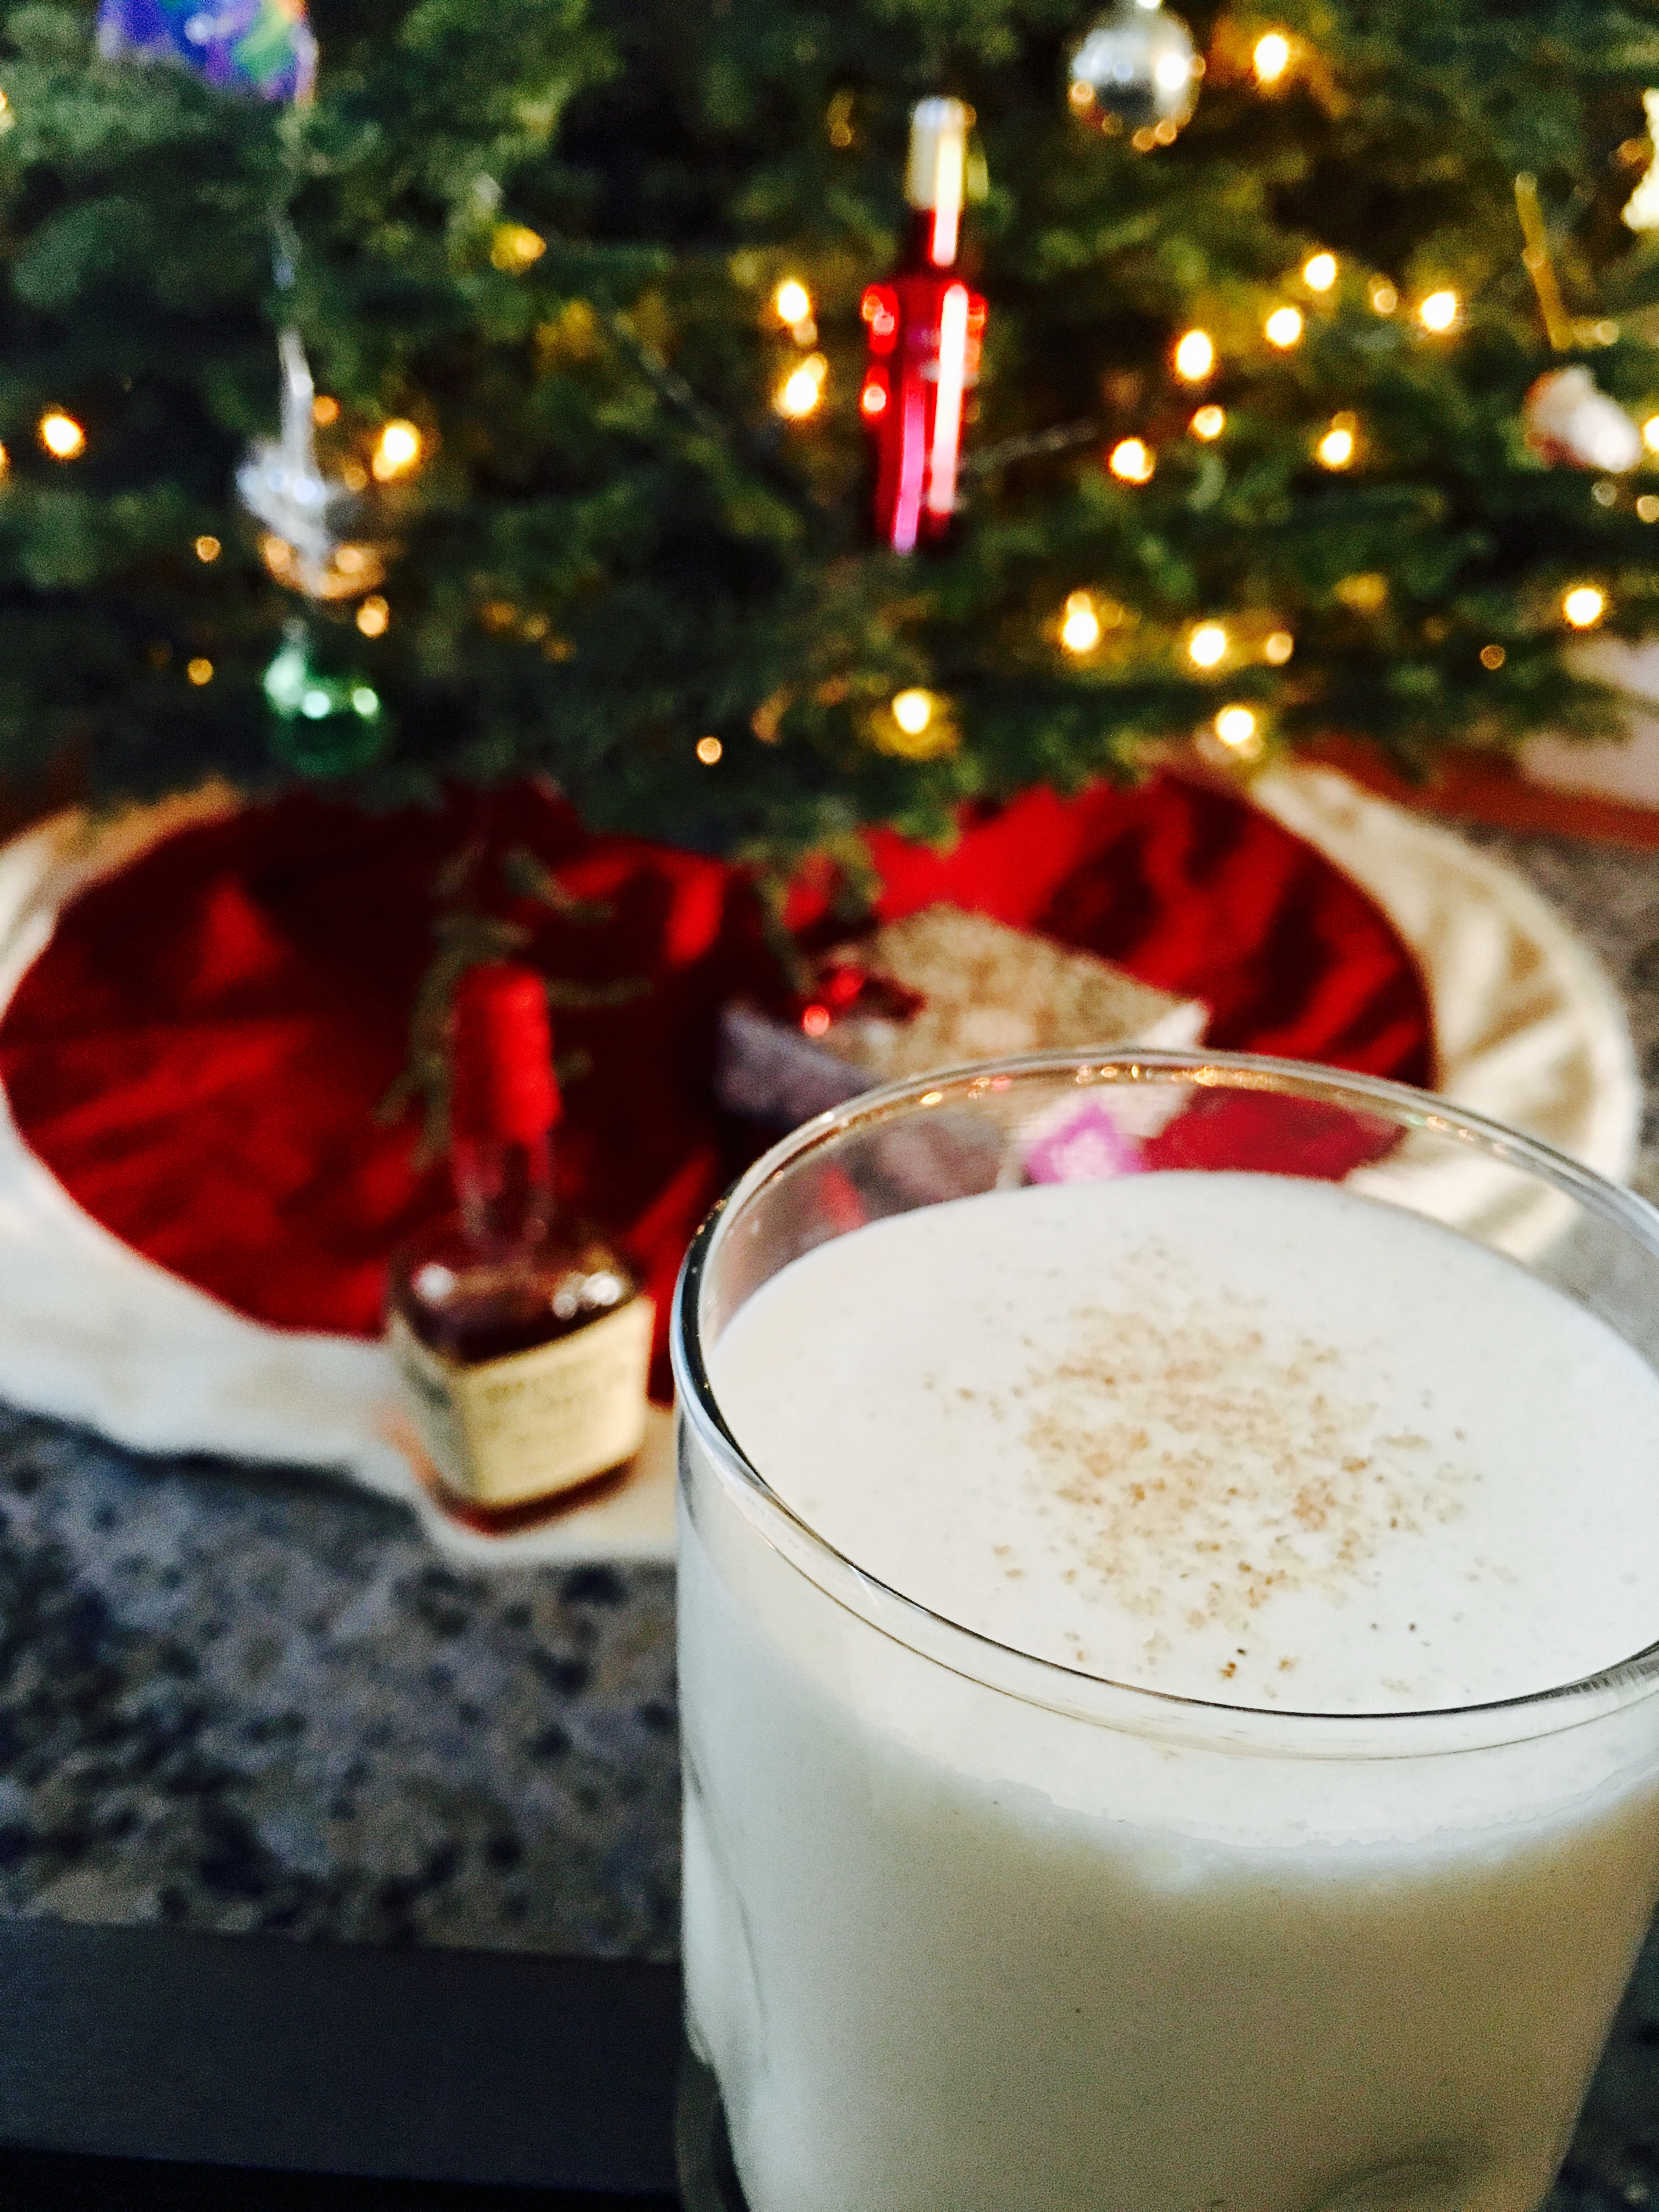 Easy Eggnog Recipe - ready to enjoy by the tree in just minutes!